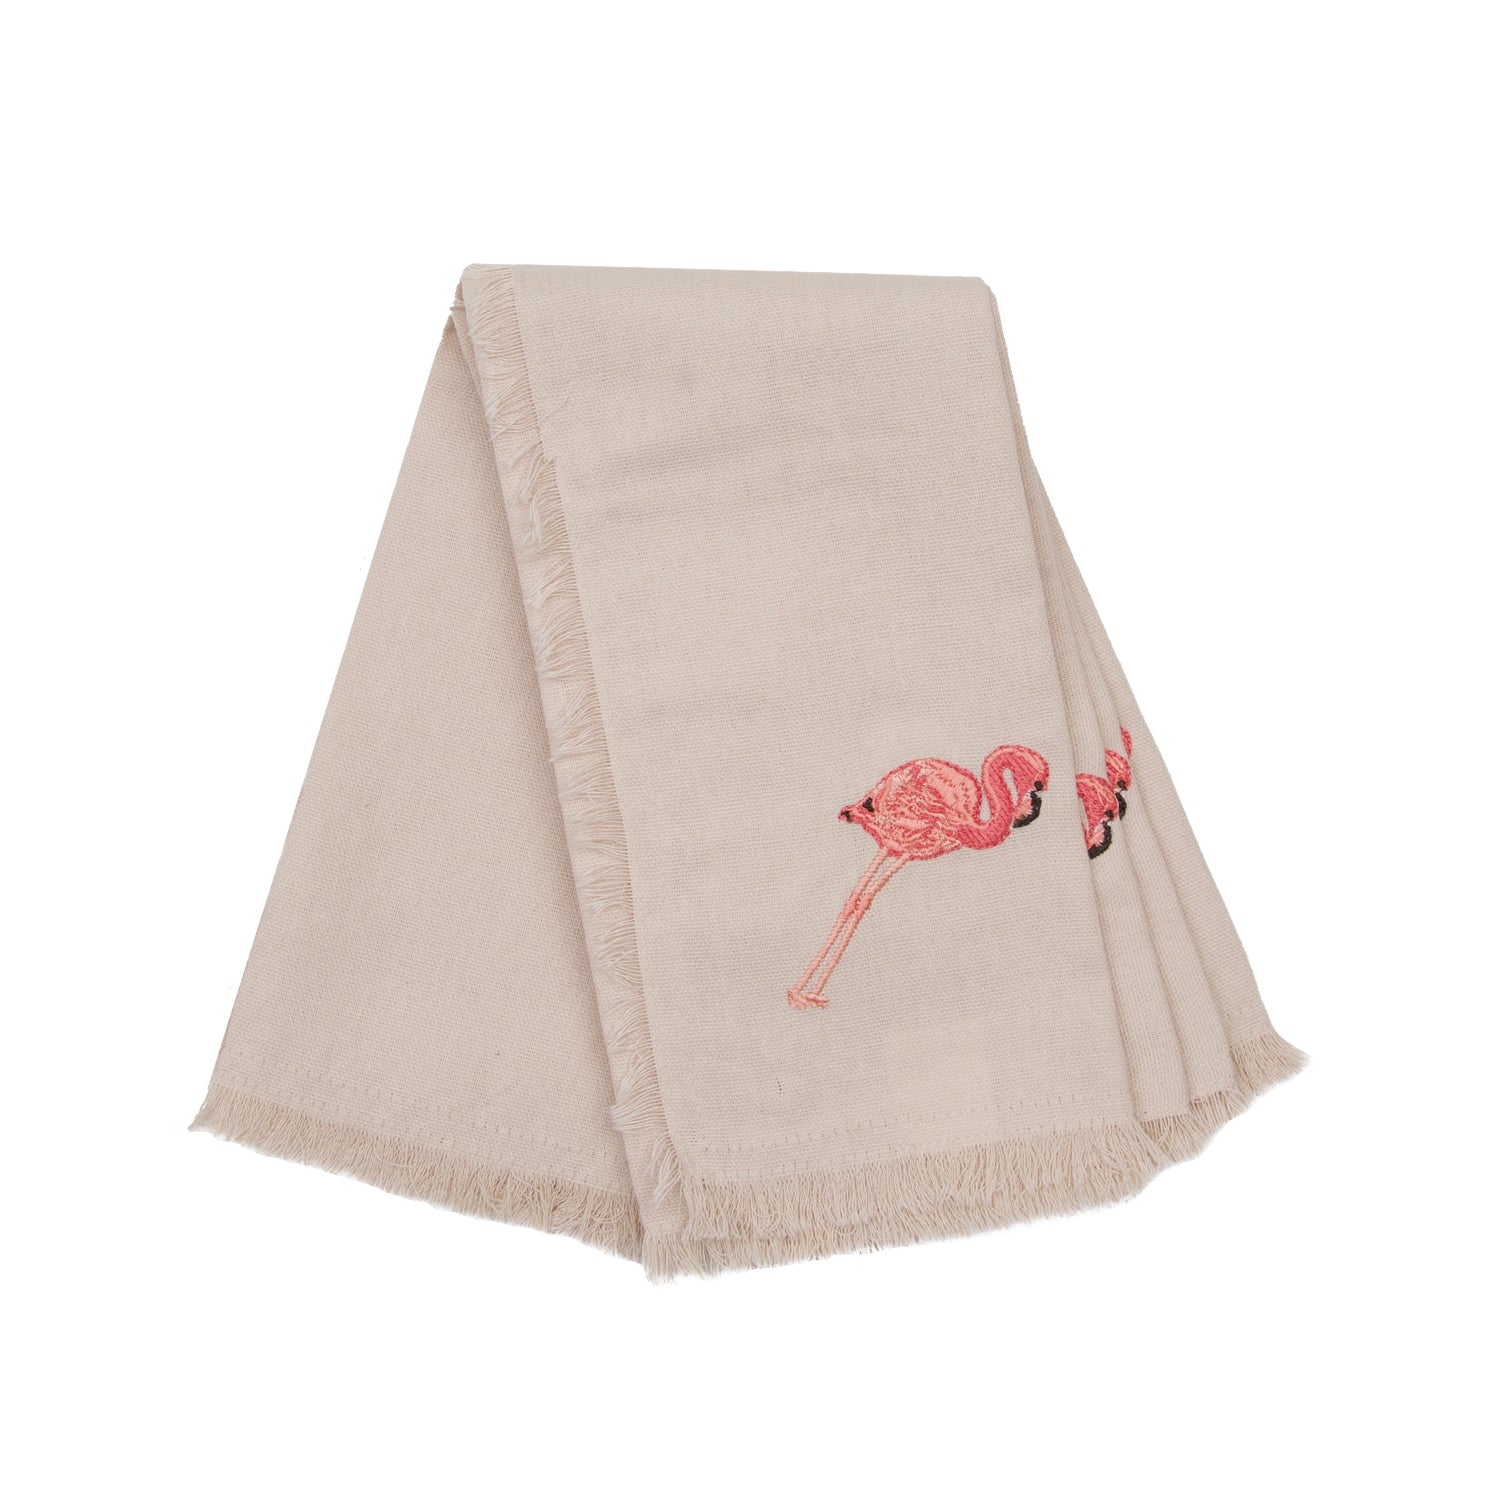 4 napkins depicting embroidered Pink Flamingo on a tan cotton background with fringe edges.